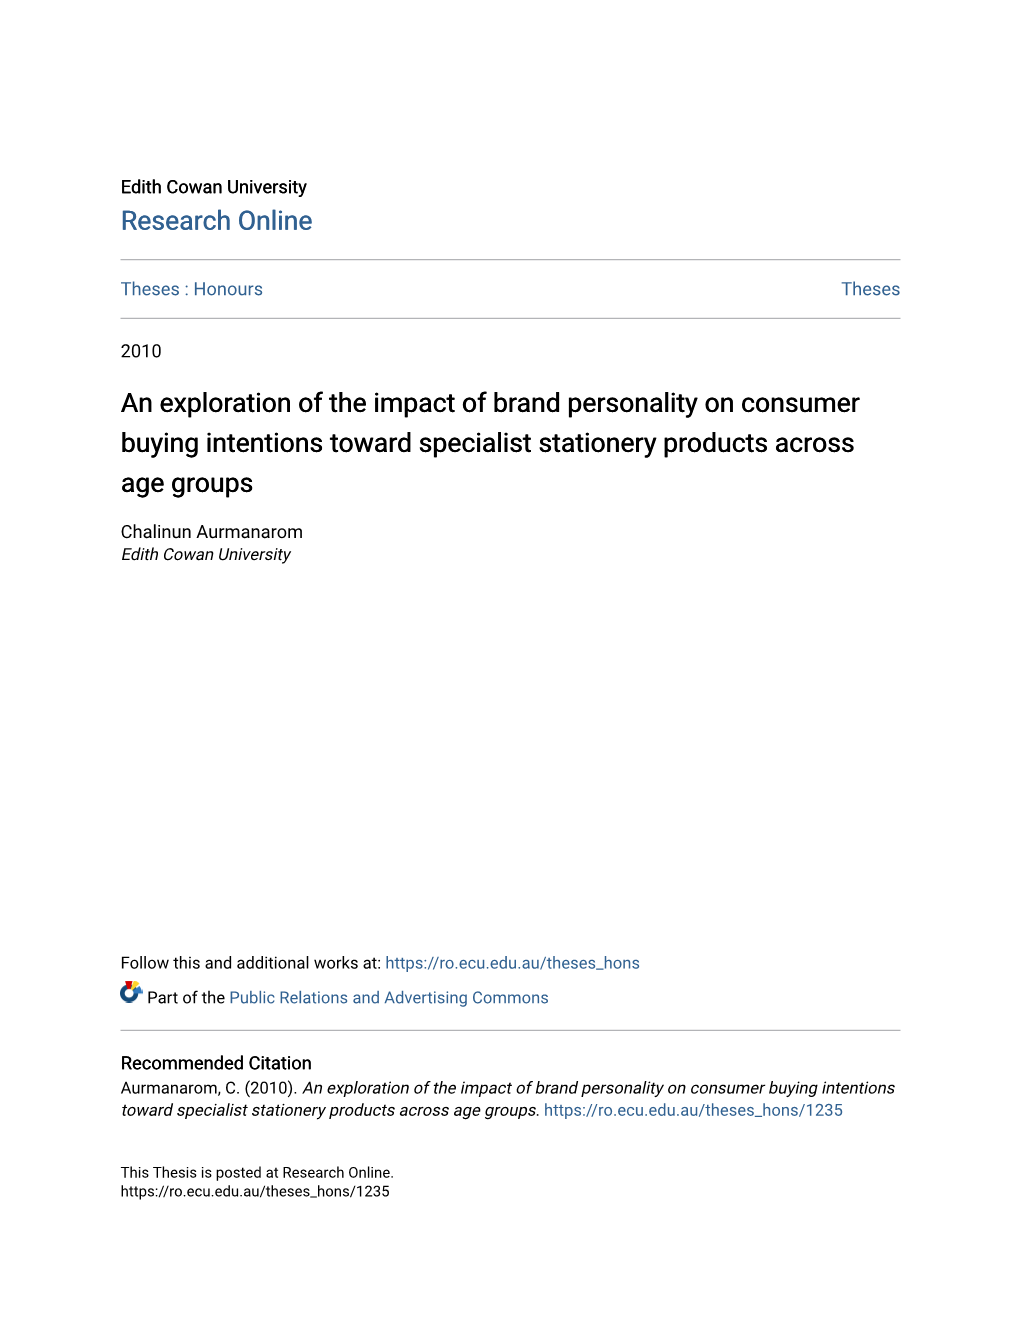 An Exploration of the Impact of Brand Personality on Consumer Buying Intentions Toward Specialist Stationery Products Across Age Groups